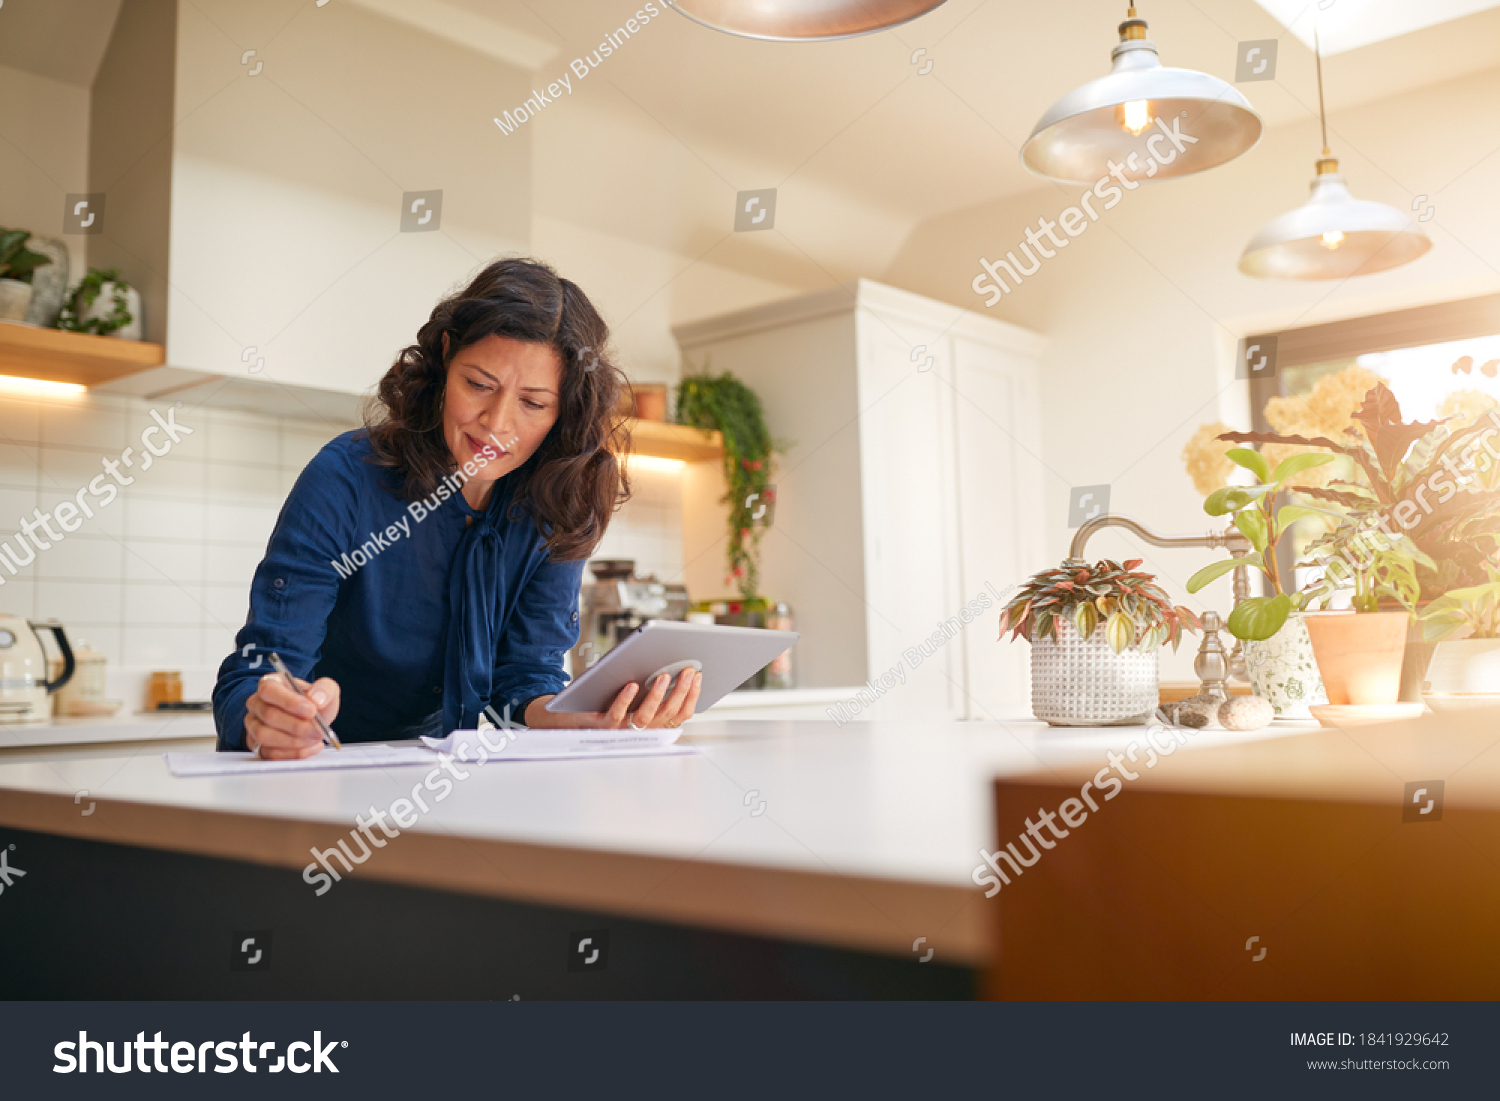 Mature Woman With Digital Tablet Reviewing Domestic Finances And Paperwork In Kitchen At Home #1841929642